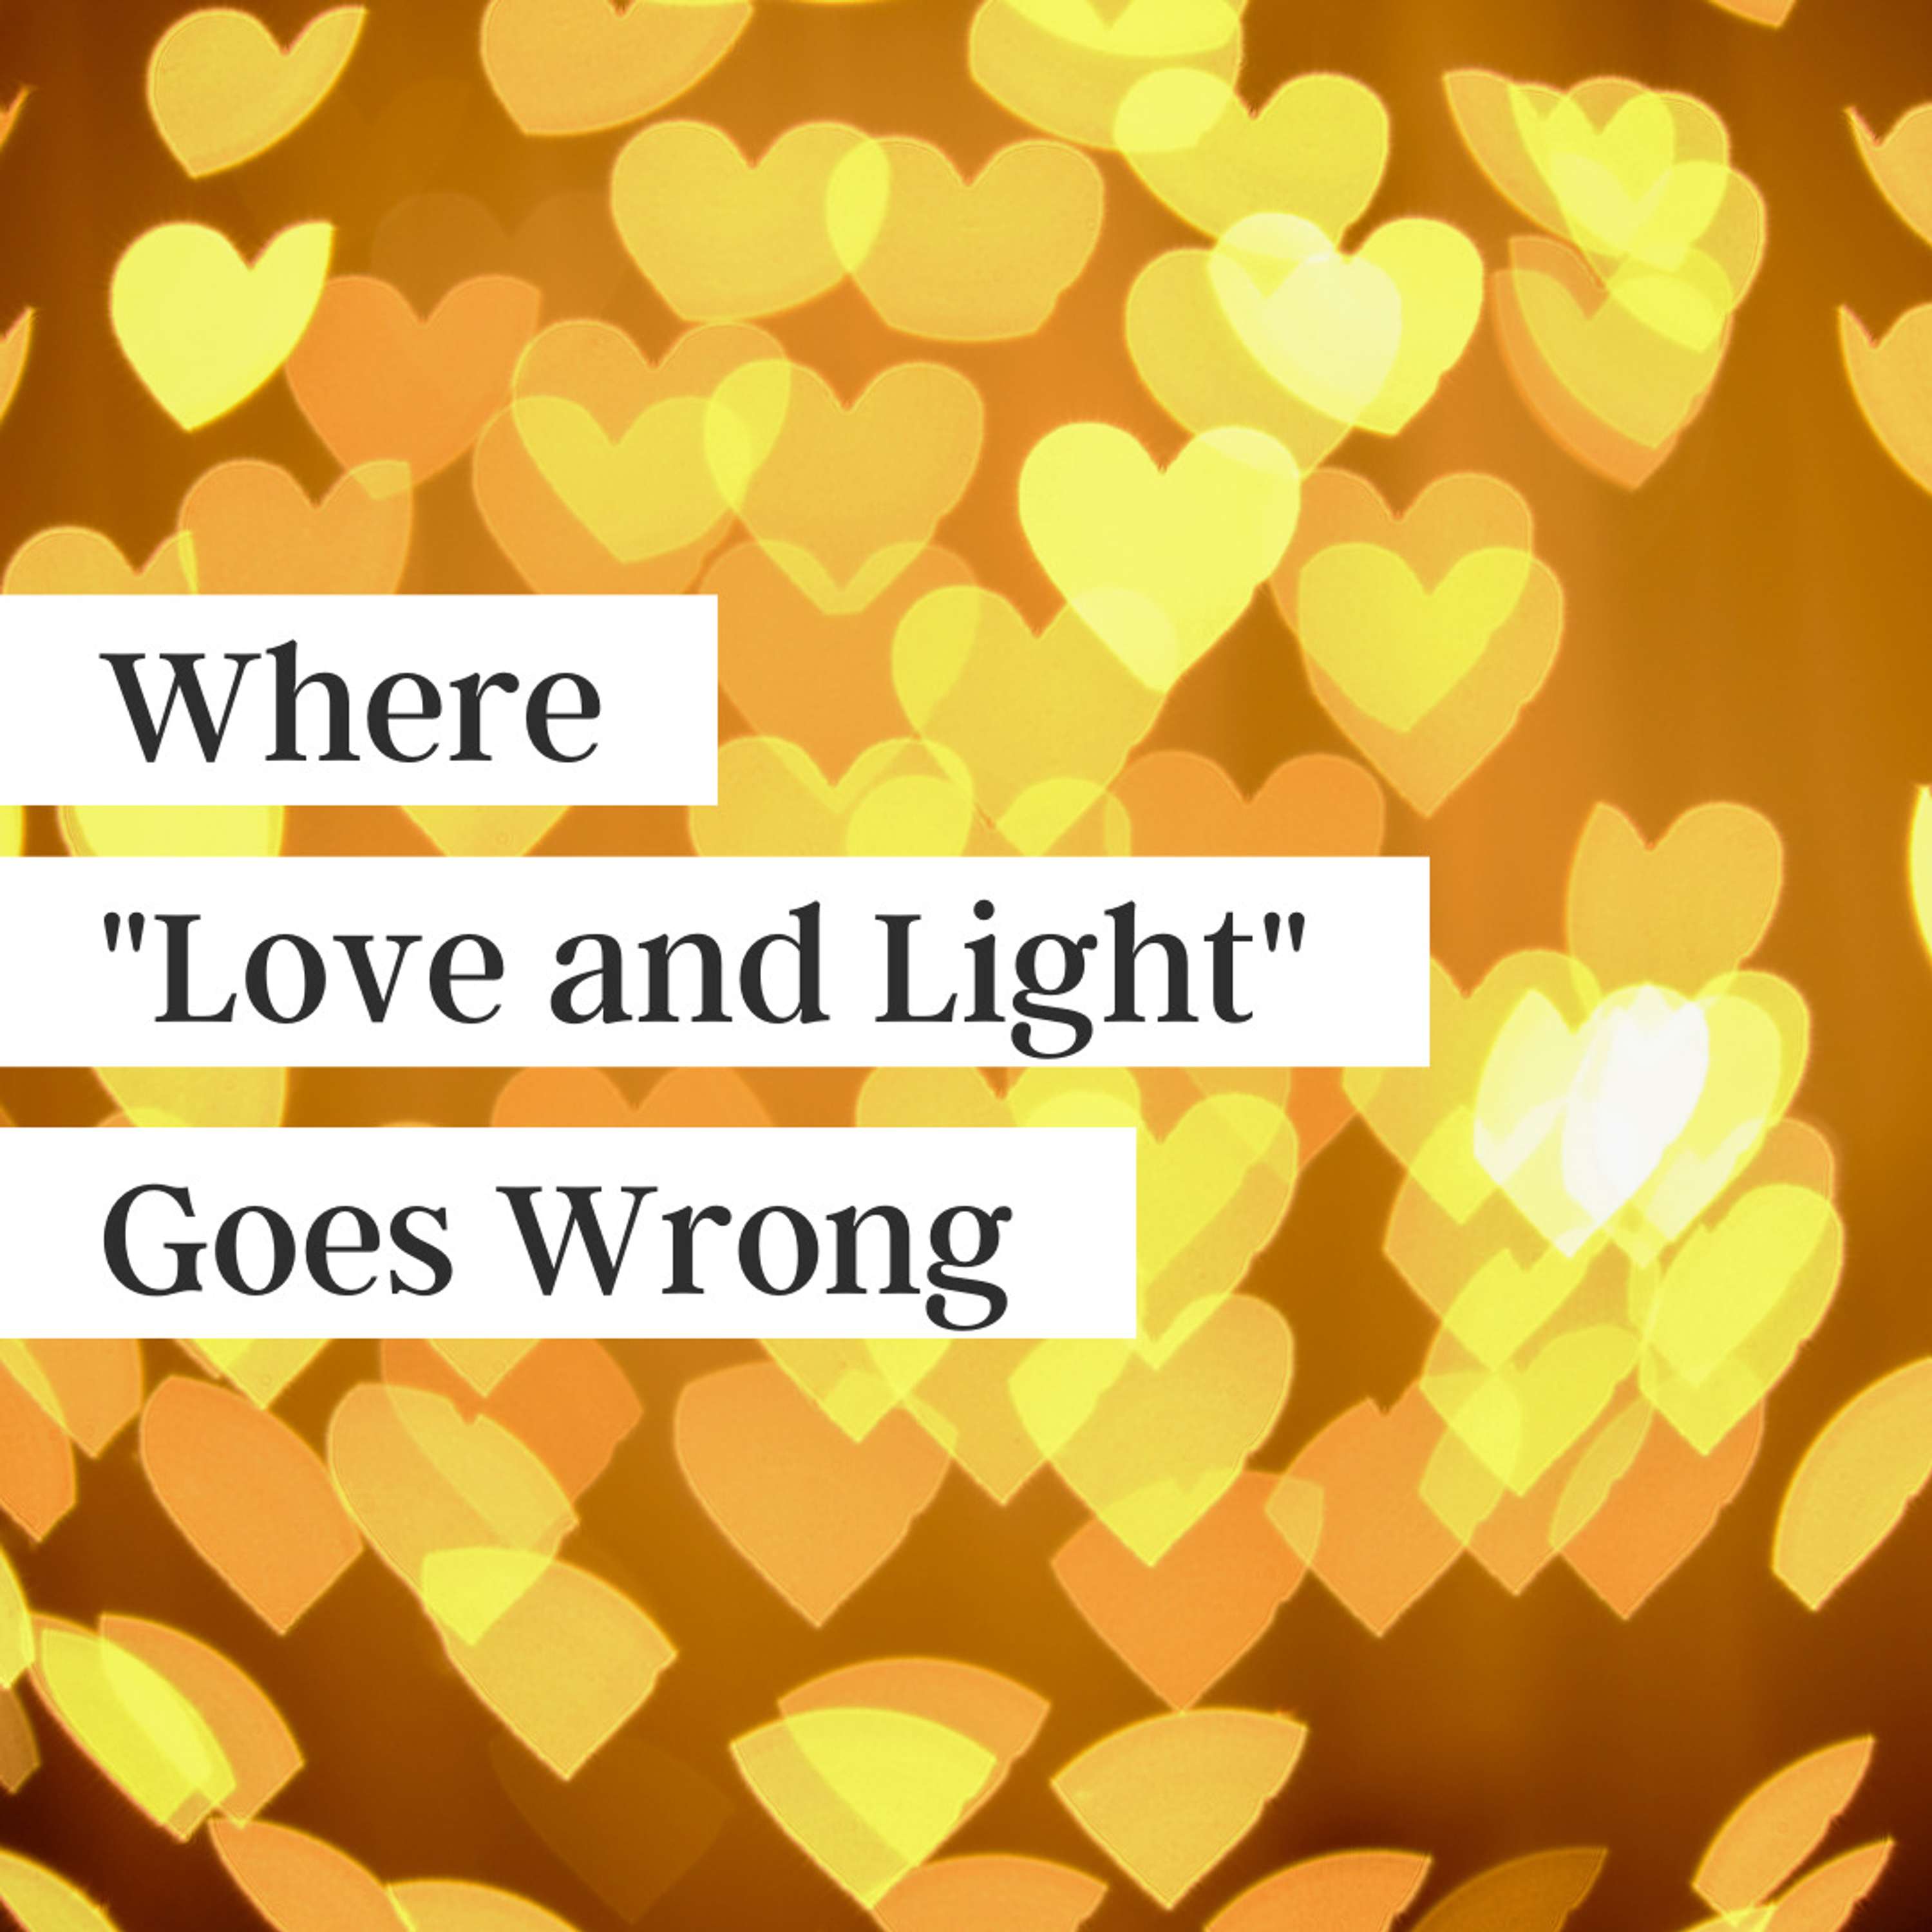 When ”Love and Light” Goes Wrong